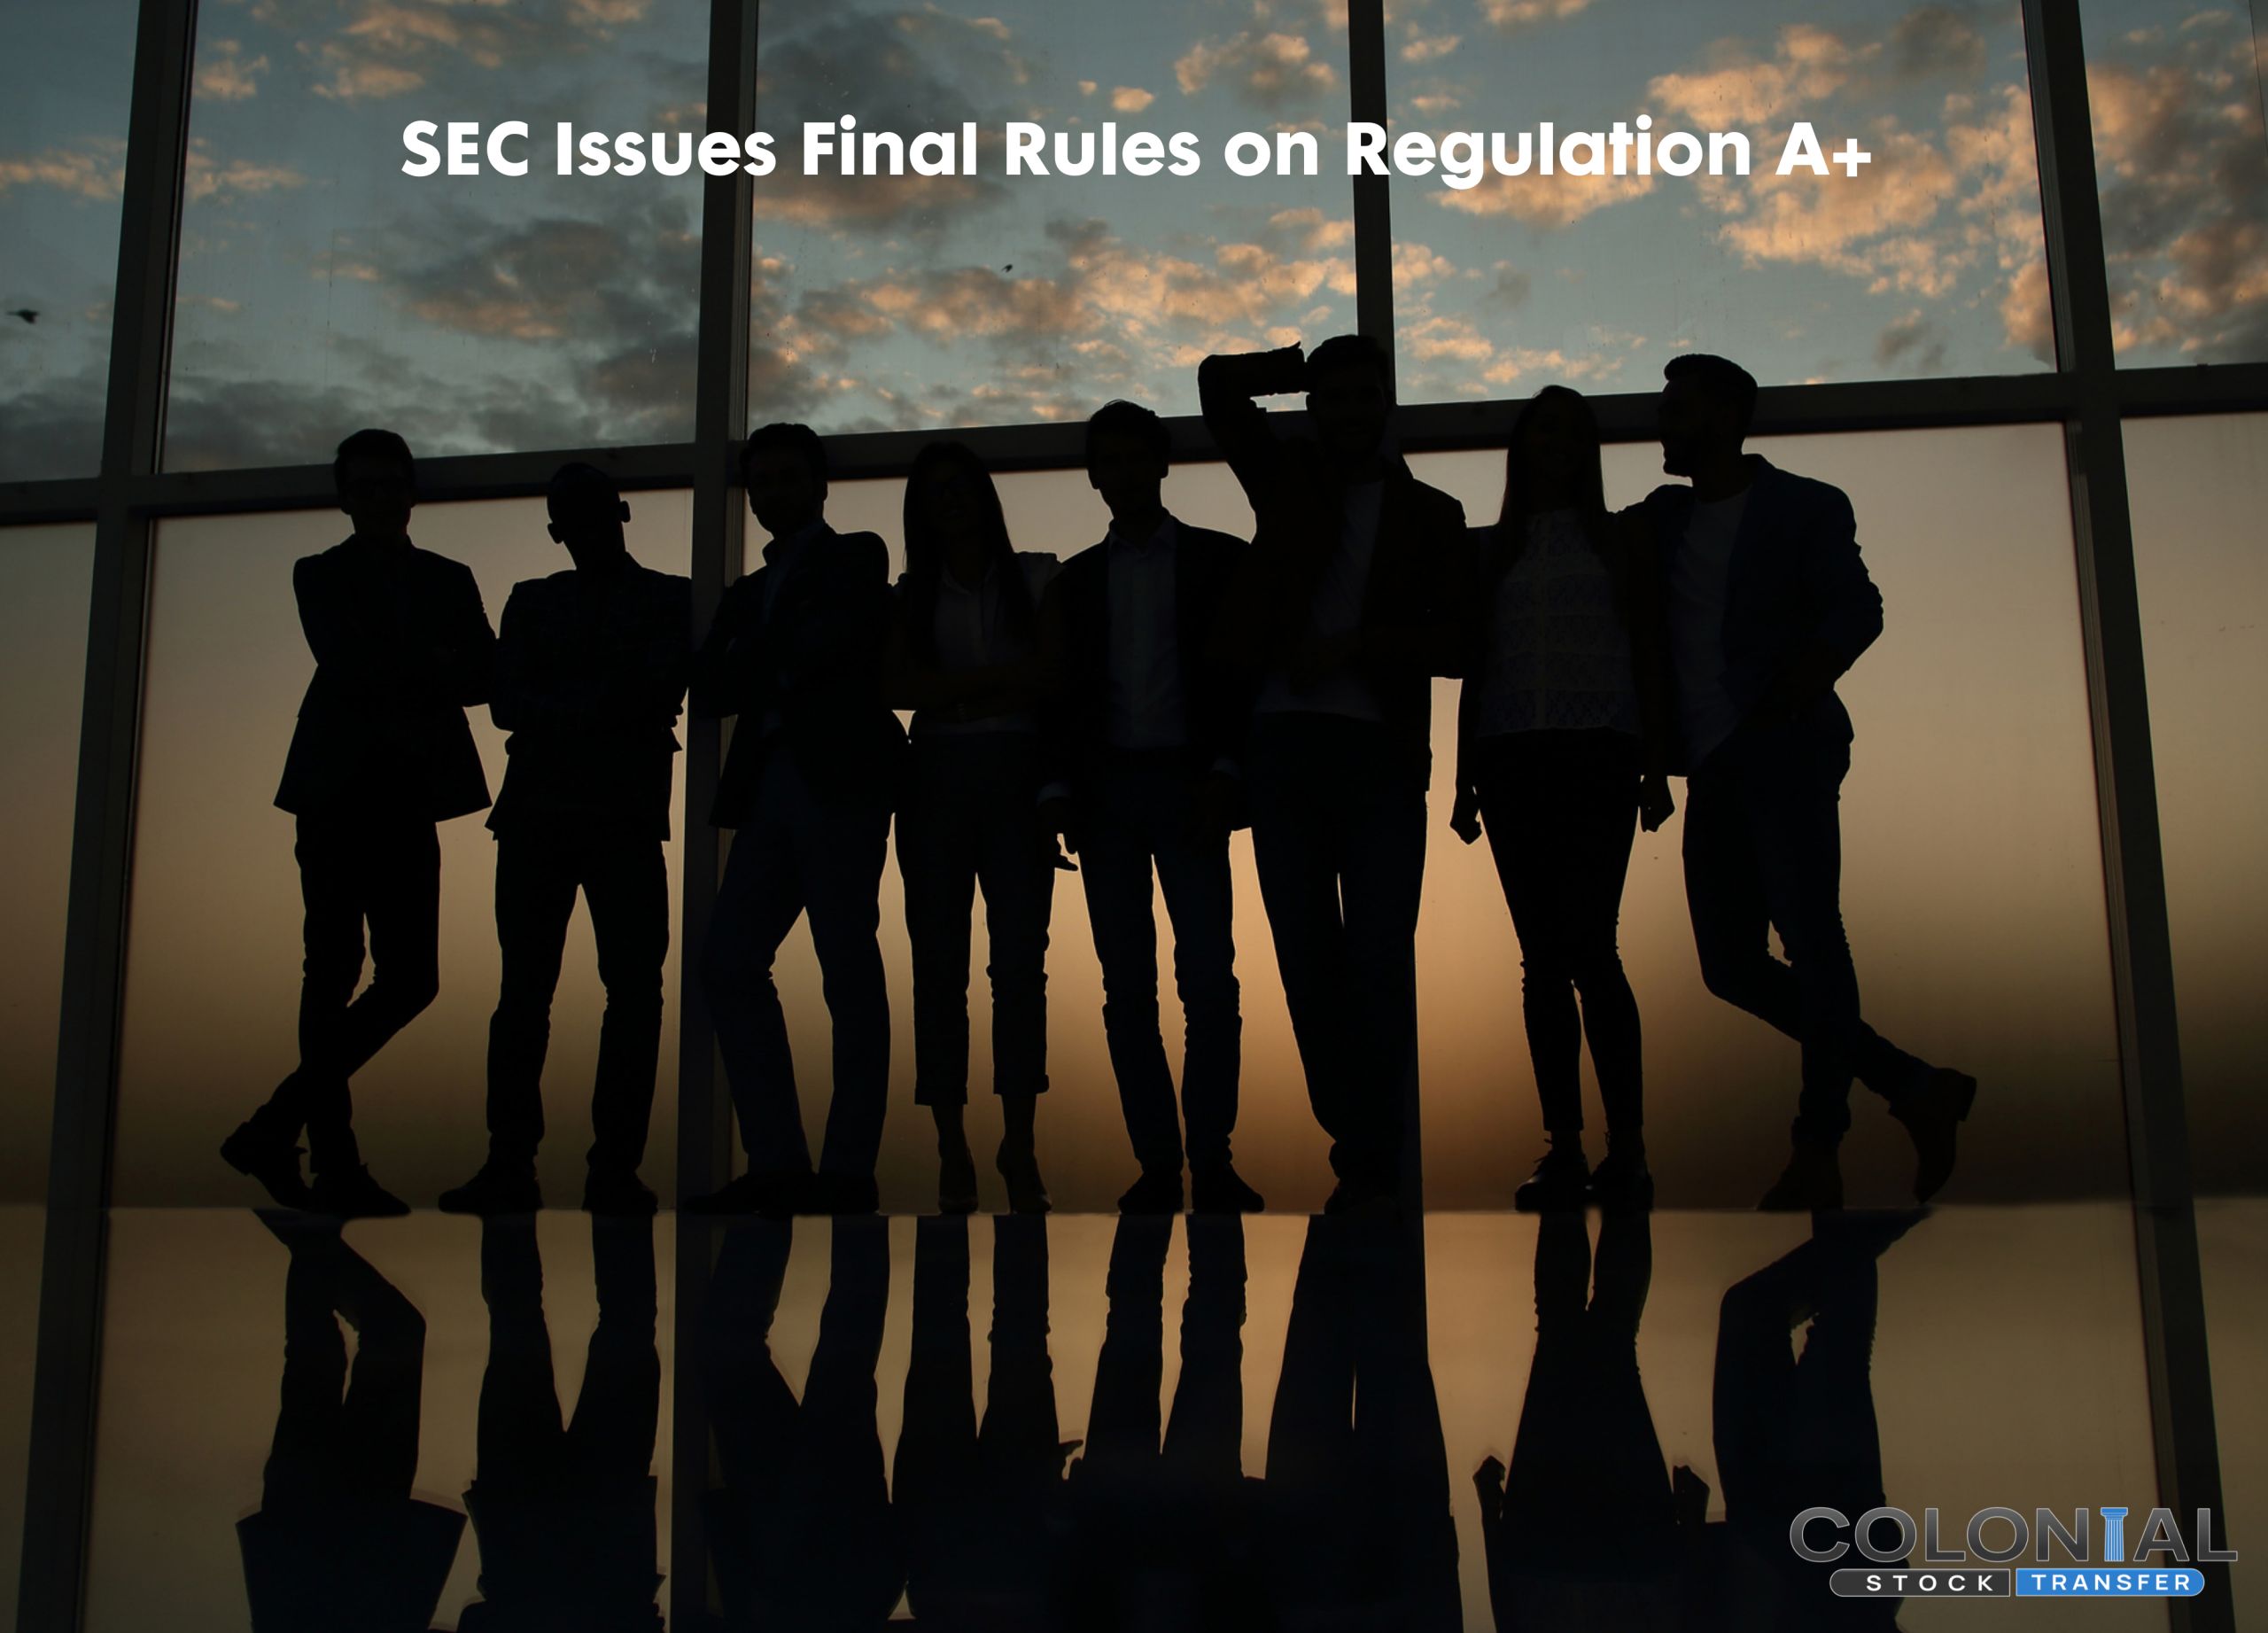 SEC Issues Final Rules on Regulation A+